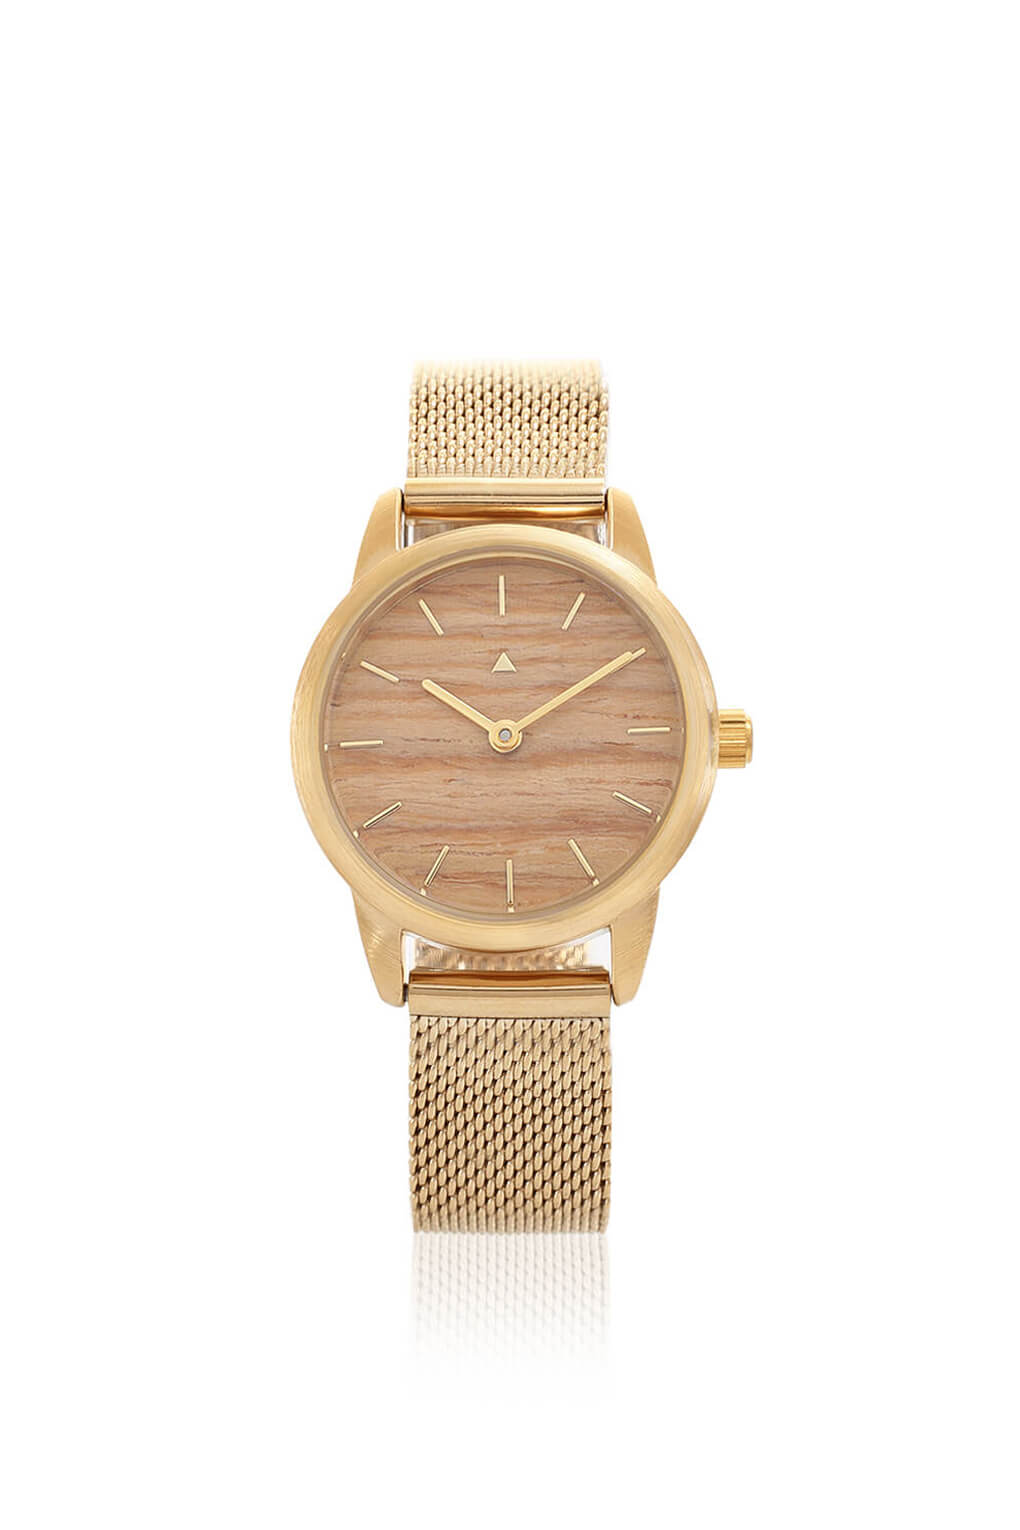 25 mm watch with oak and a golden mesh strap